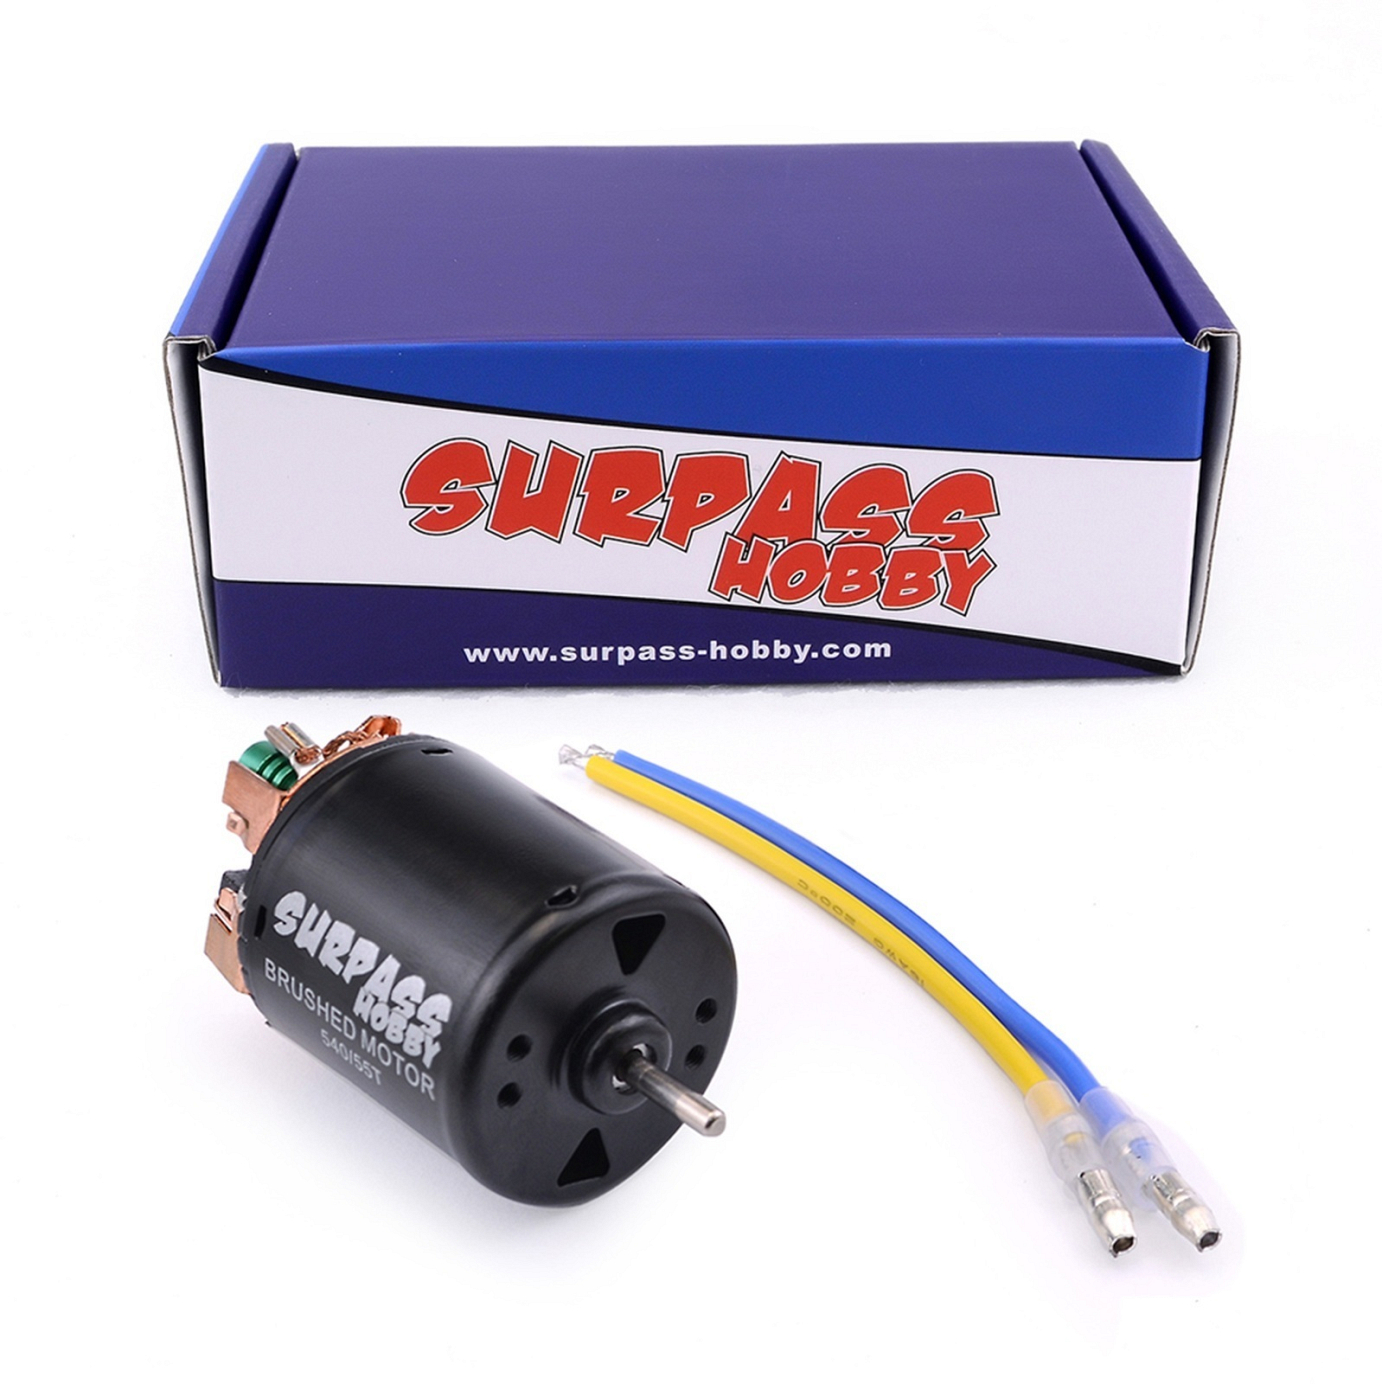 Surpass Hobby 540 brushed motor 3-slot 27T RPM: 17800 IO: 1.4A ?